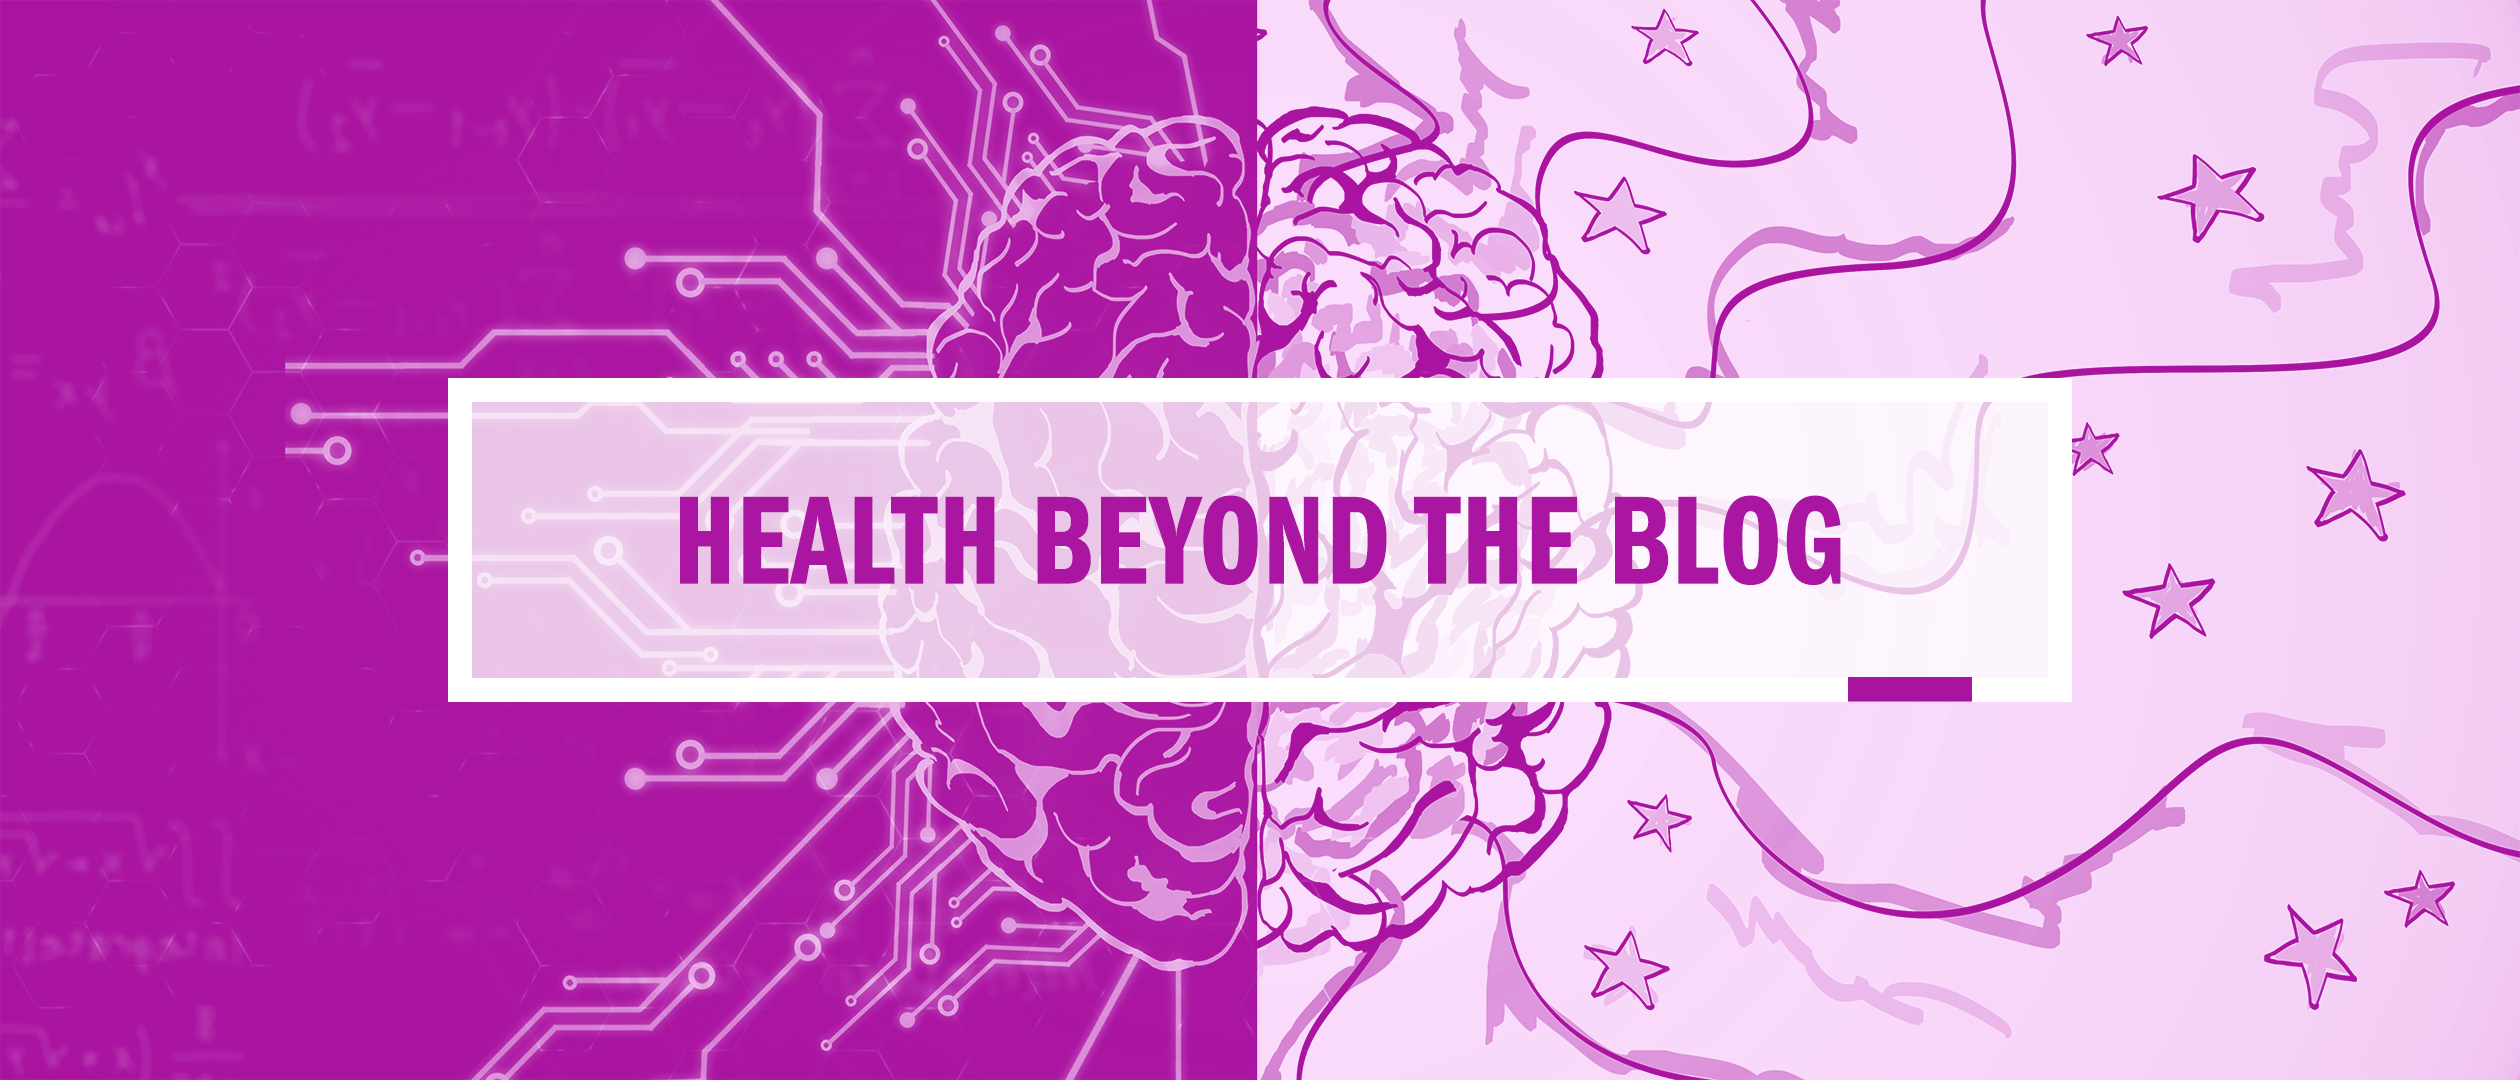 A red-violet image of a brainm, with circuit diagrams to the left and ribbons and stars to the right, surmounted by a semi-opaque white blog containing the words "Health Beyond the Blog"